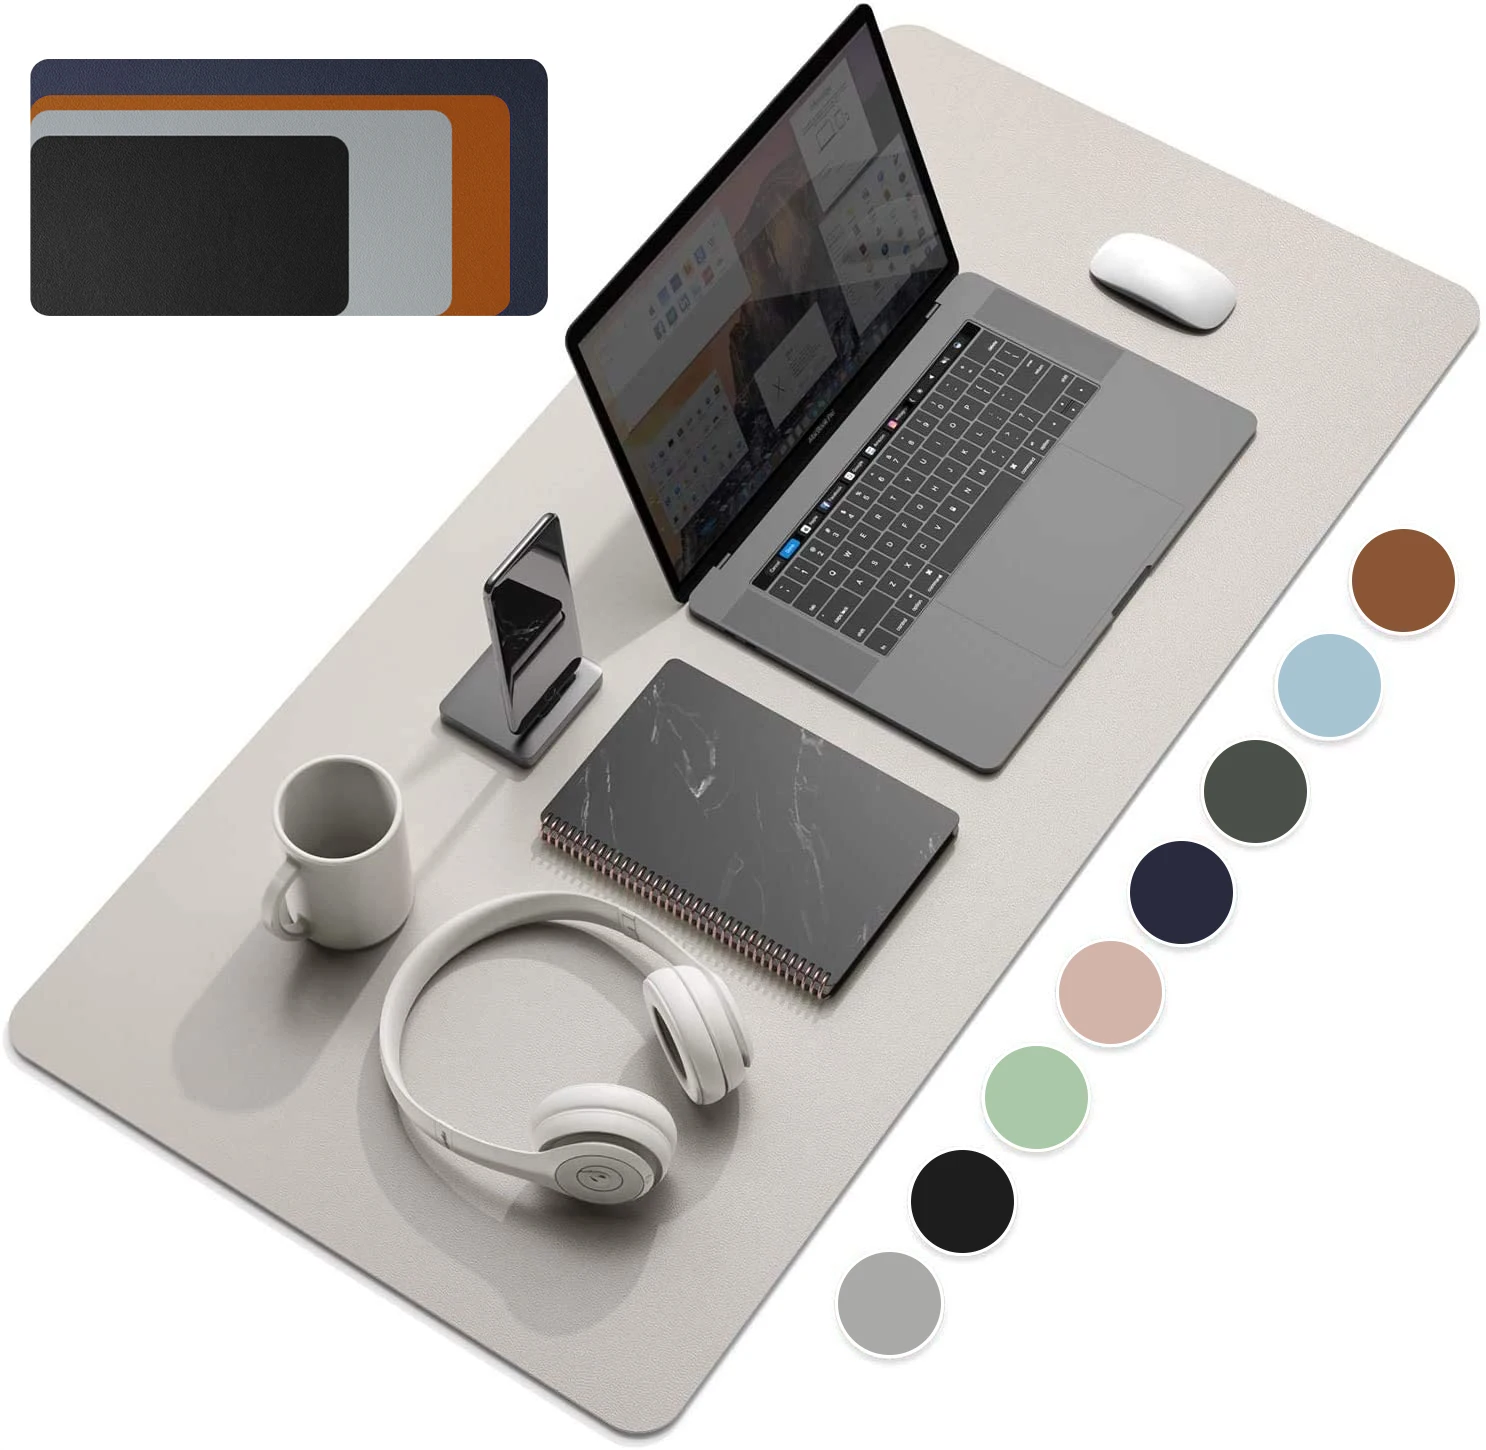 Large Size Office Desk Protector Mat PU Leather Waterproof Mouse Pad Desktop Keyboard Desk Pad Gaming